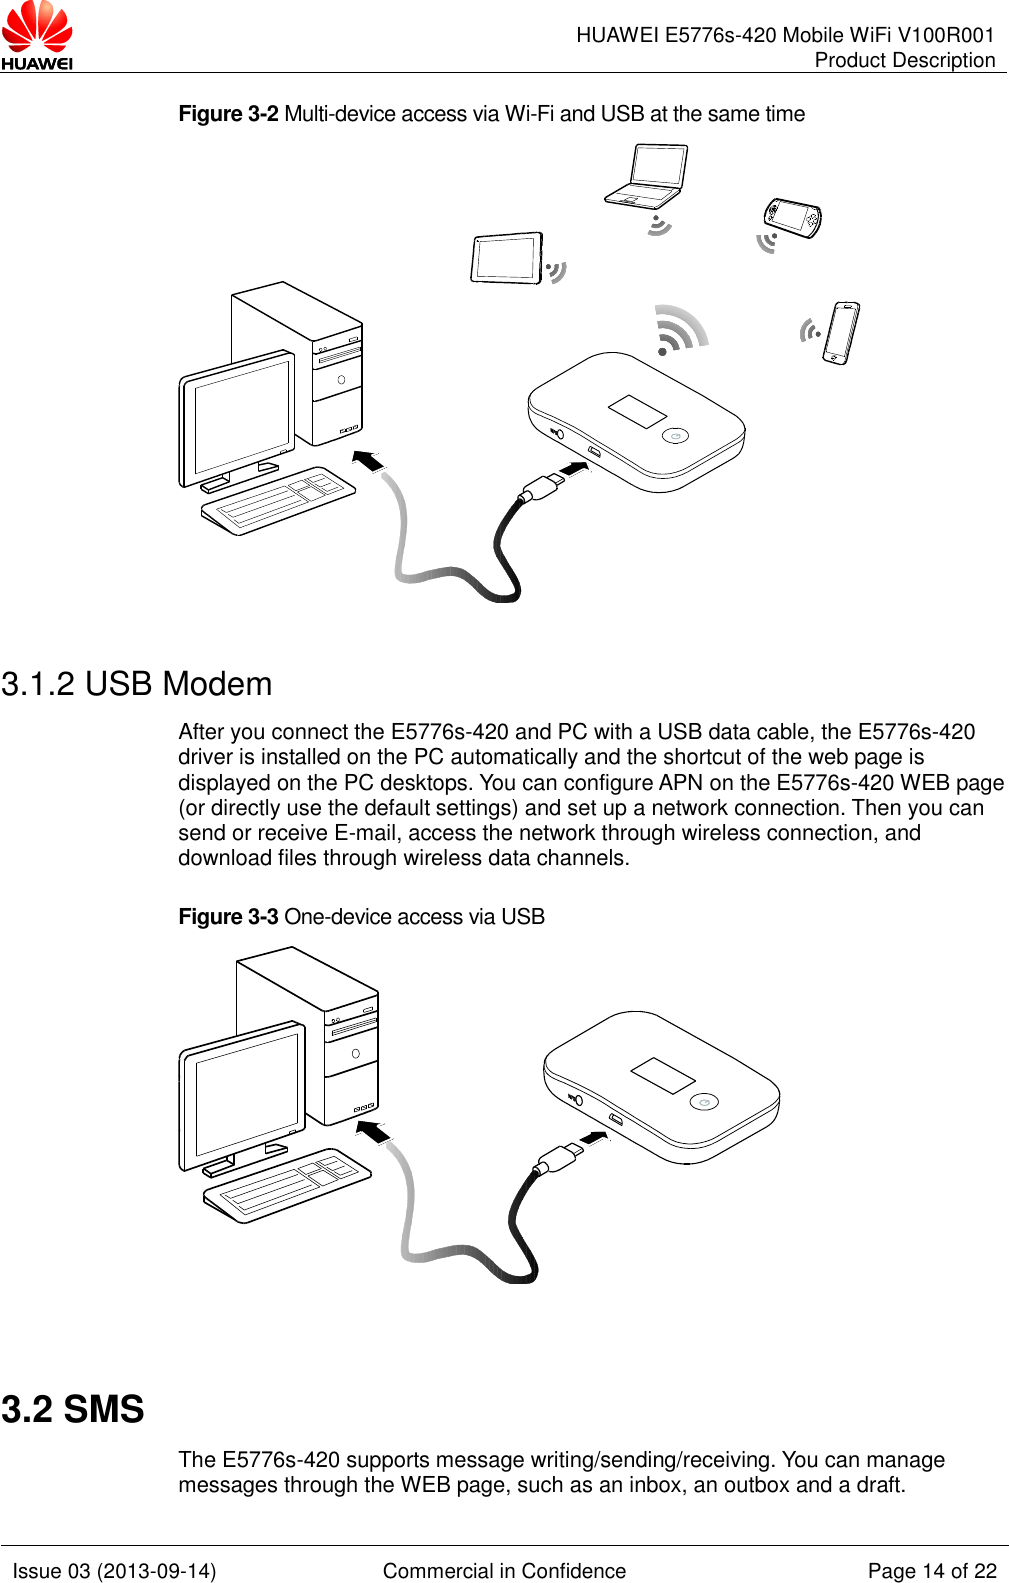      HUAWEI E5776s-420 Mobile WiFi V100R001 Product Description    Issue 03 (2013-09-14) Commercial in Confidence Page 14 of 22  Figure 3-2 Multi-device access via Wi-Fi and USB at the same time   3.1.2 USB Modem After you connect the E5776s-420 and PC with a USB data cable, the E5776s-420 driver is installed on the PC automatically and the shortcut of the web page is displayed on the PC desktops. You can configure APN on the E5776s-420 WEB page (or directly use the default settings) and set up a network connection. Then you can send or receive E-mail, access the network through wireless connection, and download files through wireless data channels. Figure 3-3 One-device access via USB   3.2 SMS The E5776s-420 supports message writing/sending/receiving. You can manage messages through the WEB page, such as an inbox, an outbox and a draft.   